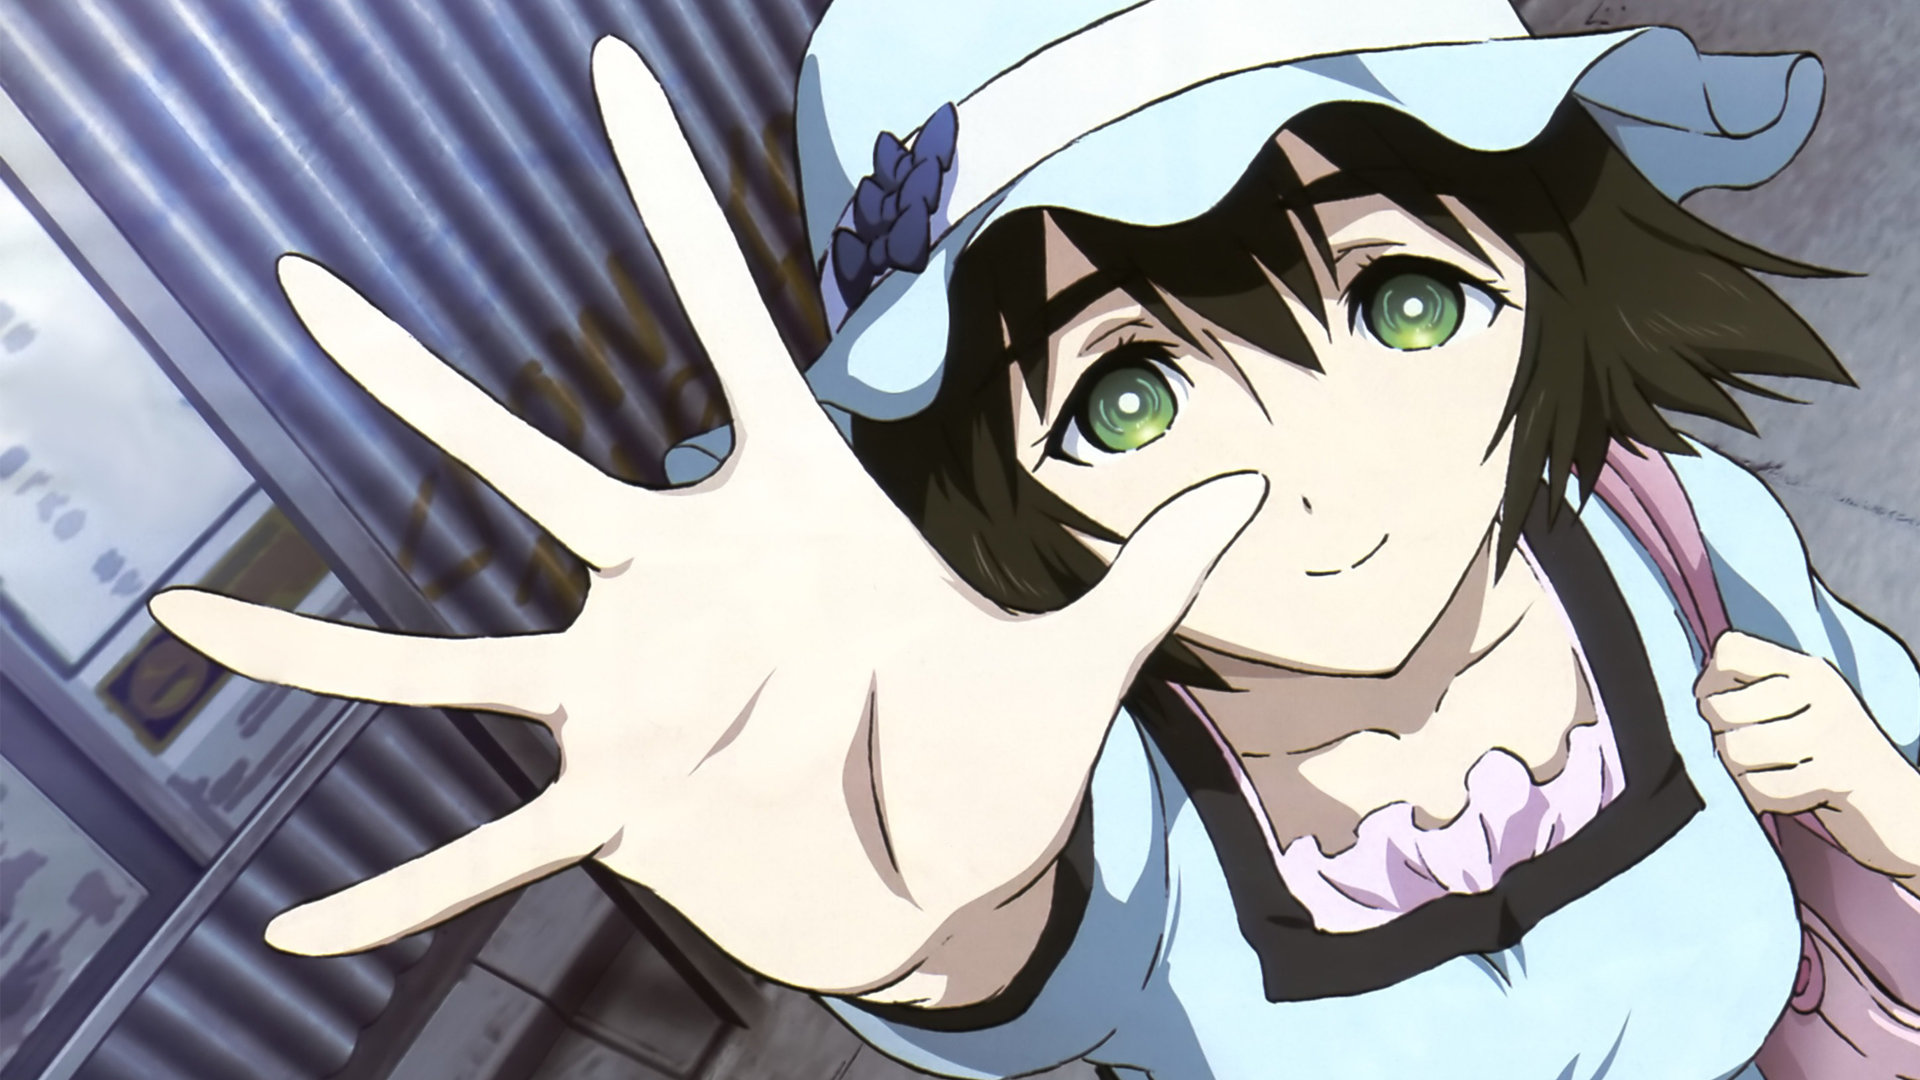 Steins Gate wallpapers HD for desktop backgrounds 